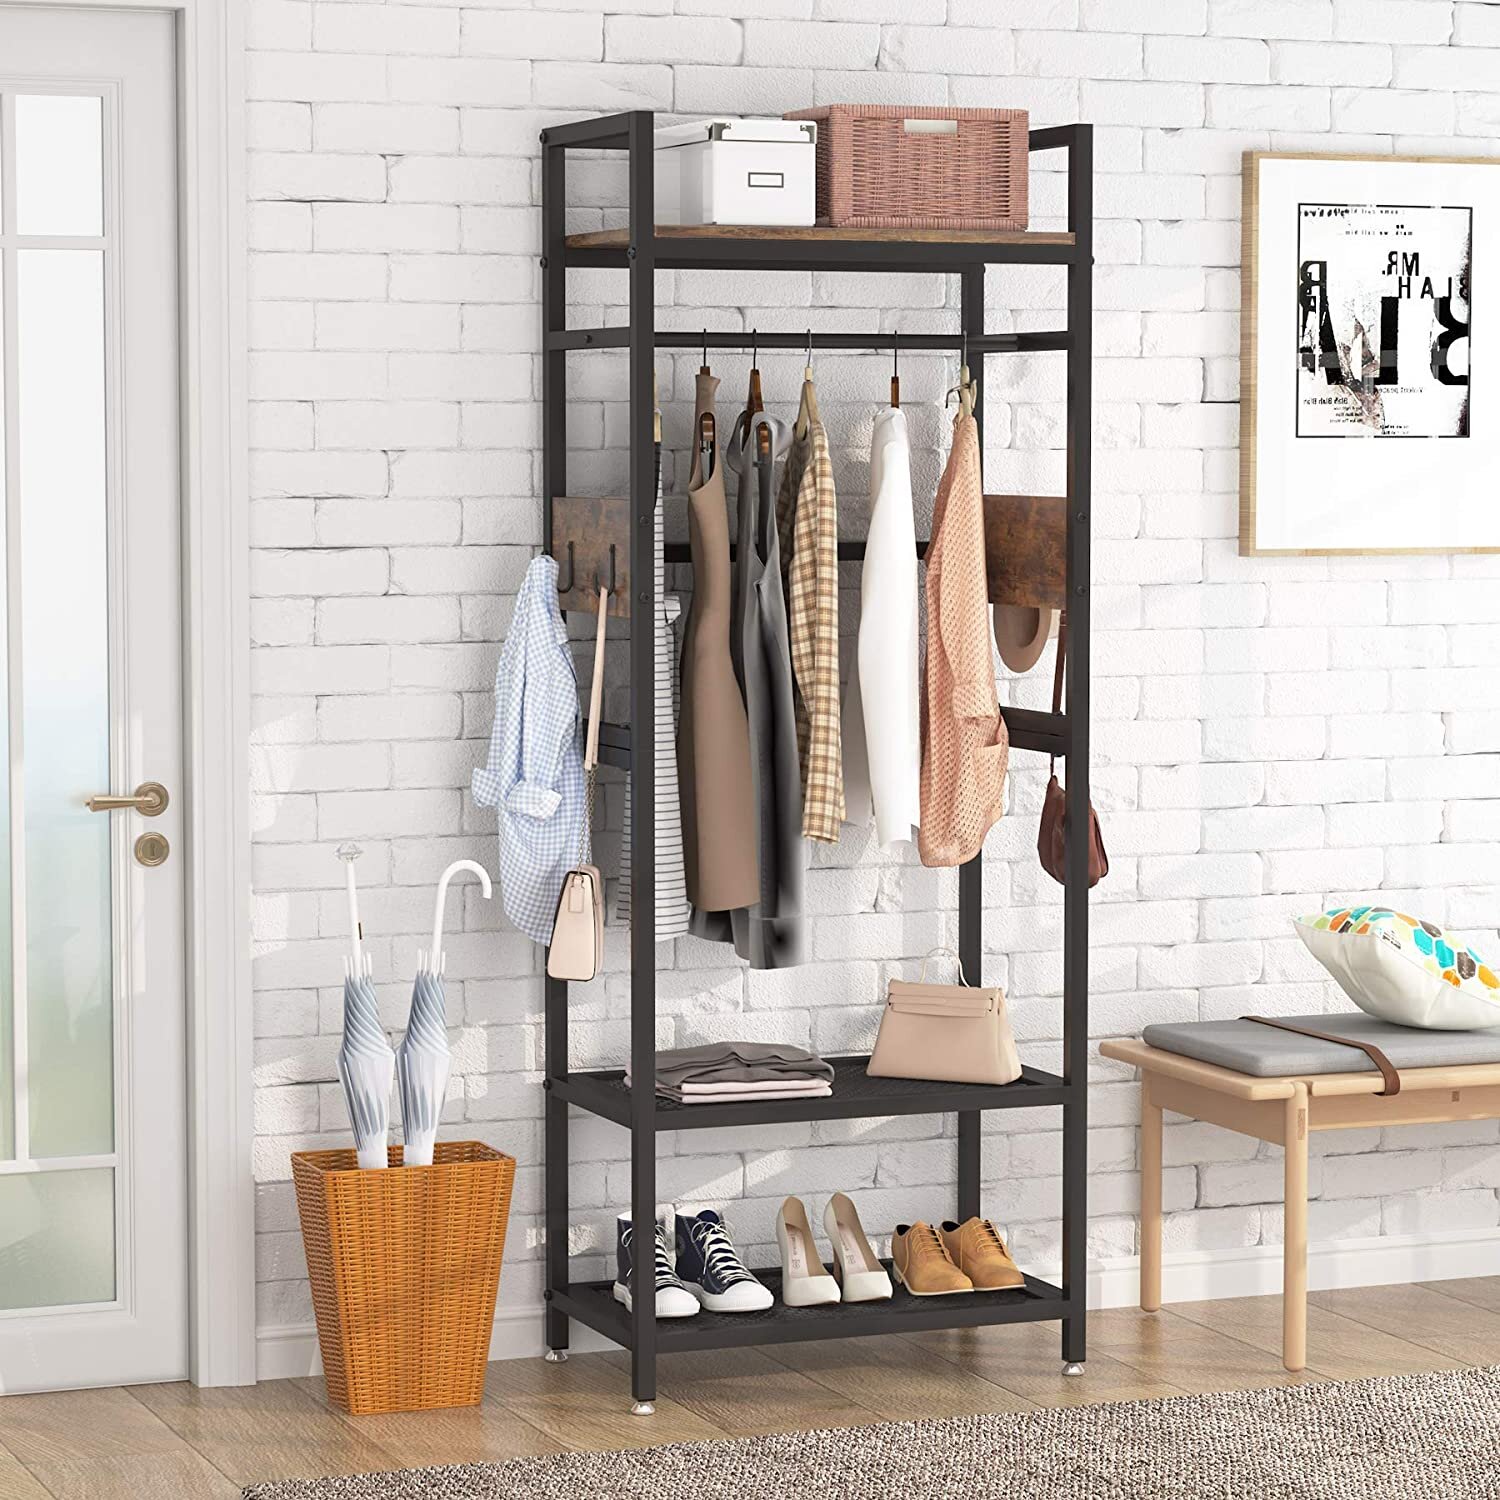 4 Tier Closet Hanging Organizer, Clothes Hanging Shelves with 5 S Hooks,  Closet Organization and Storage Wire Basket Bins for Clothing Sweater  Handbag